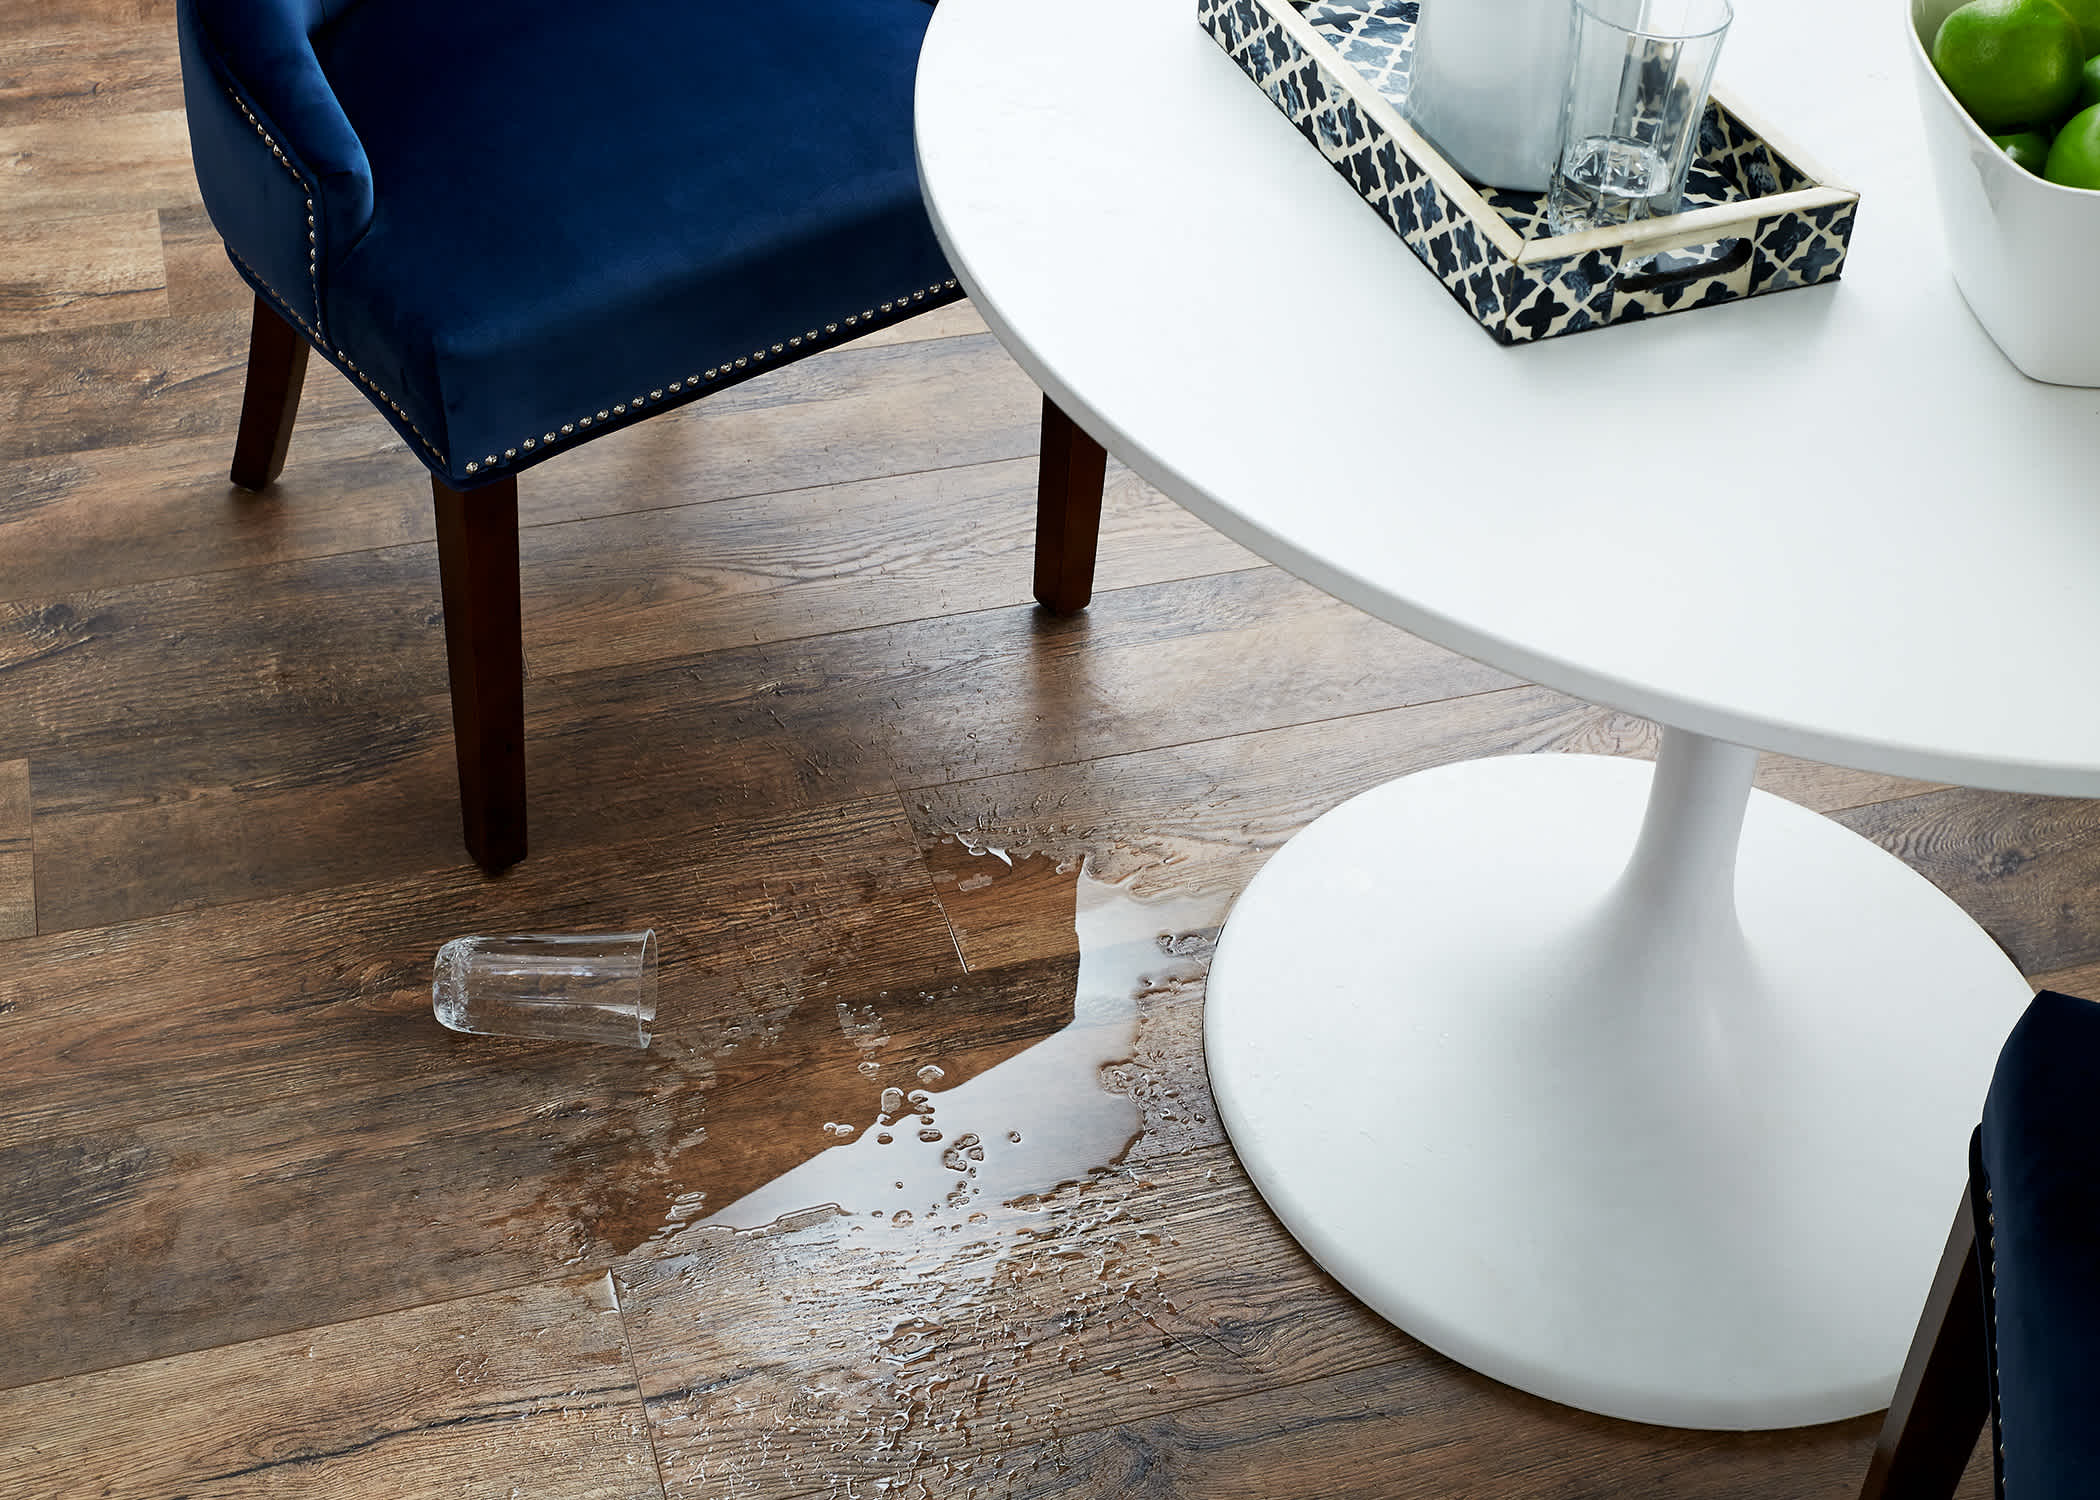 dark brown water-resistant laminate floor with spilled glass of water on floor in front of dark blue velvet chair and white oval table